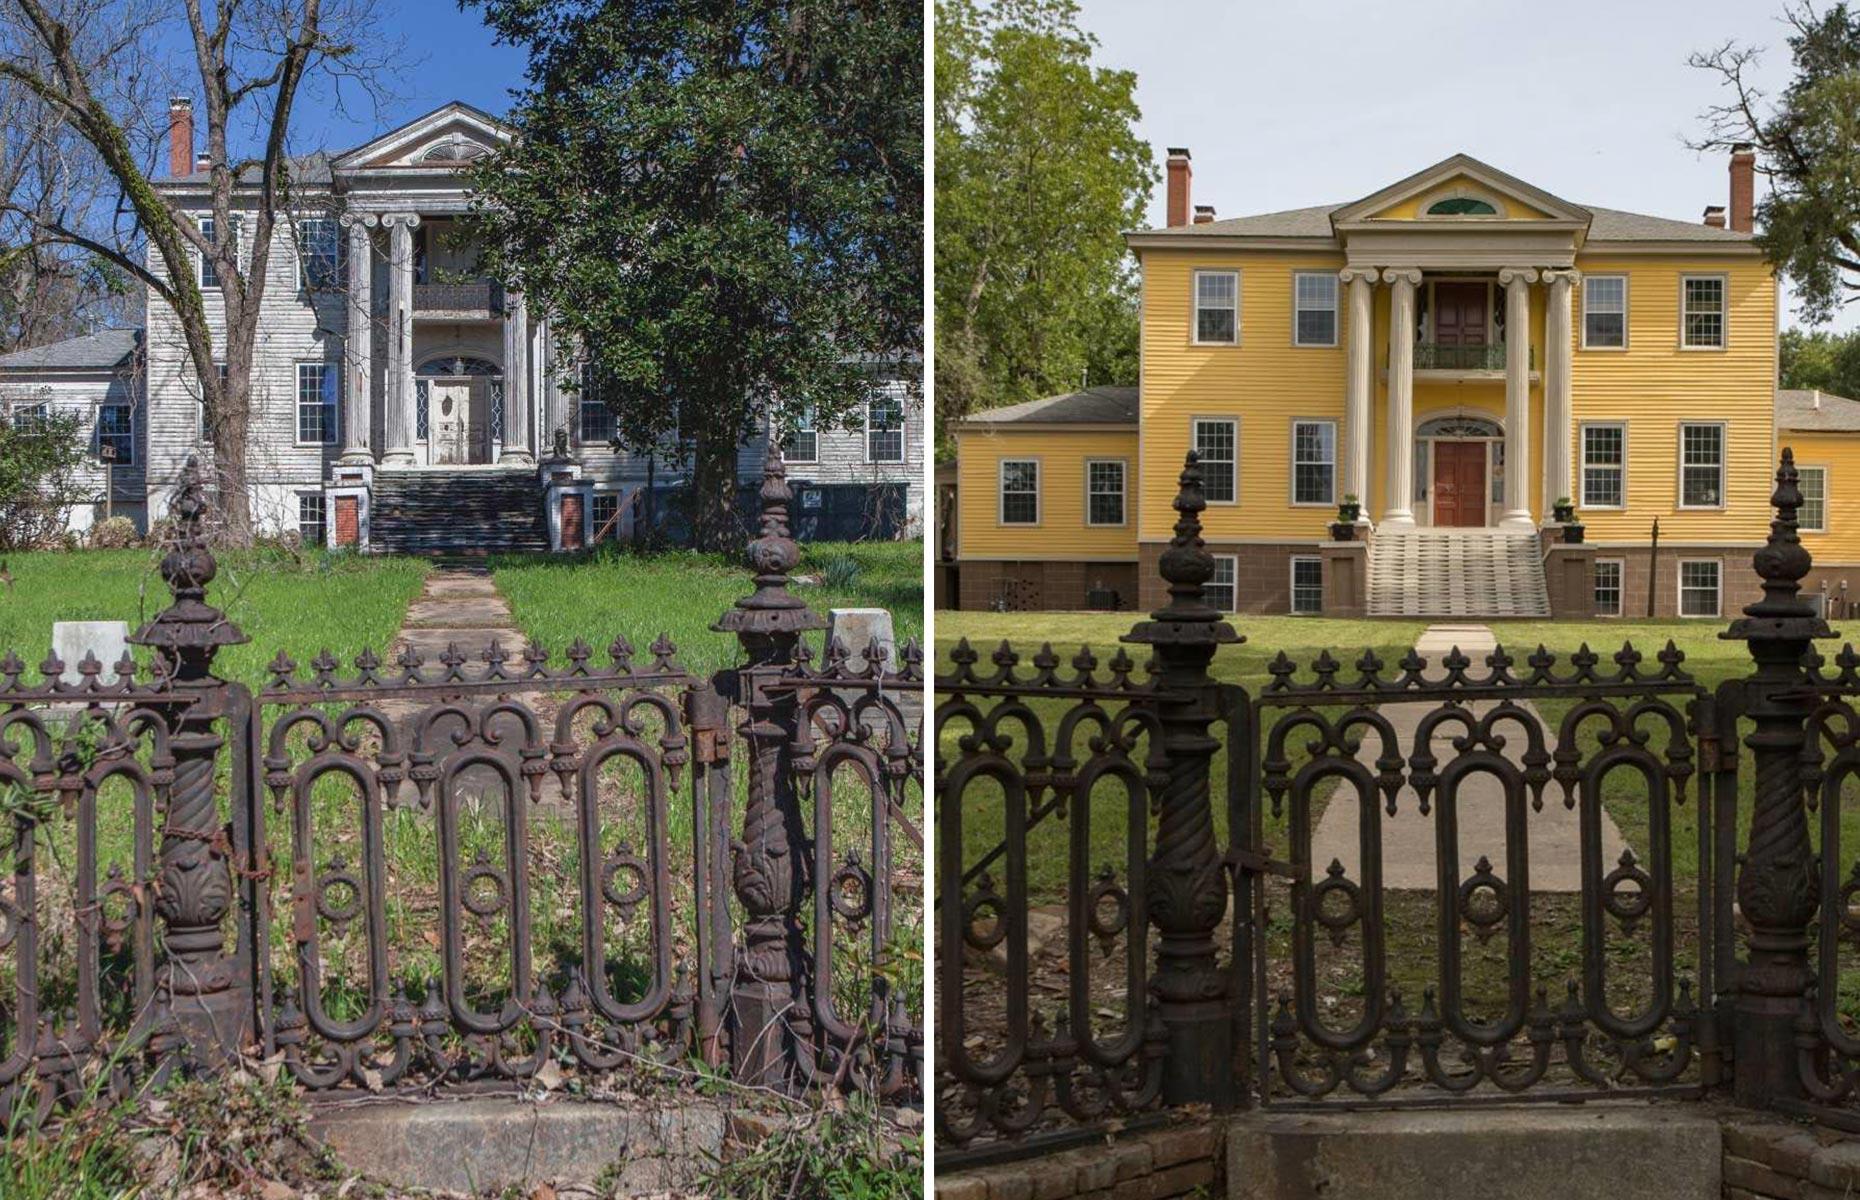 Miraculous renovation of a ruined old mansion